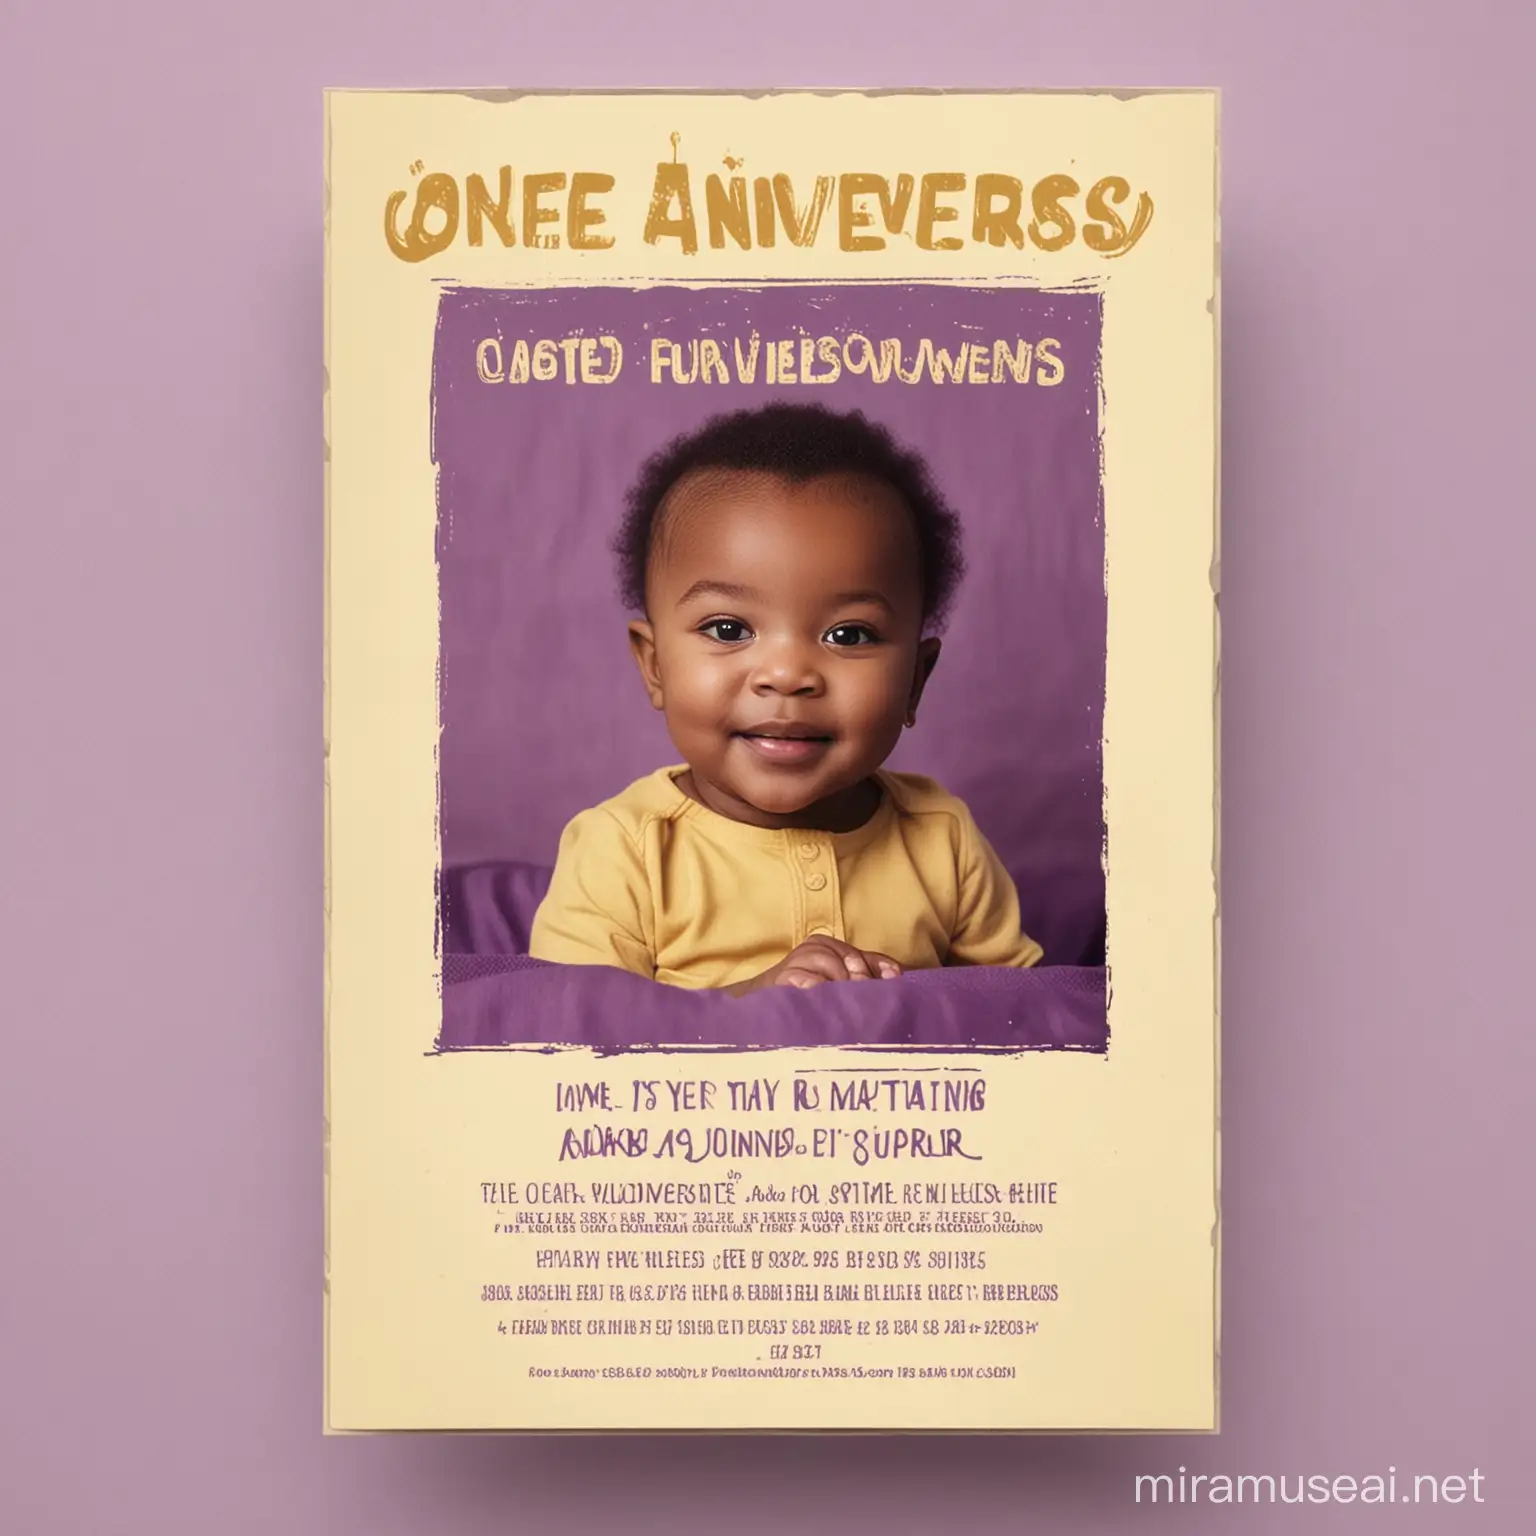 As an art and craft brand celebrating her one year anniversary at a motherless baby home, create a flyer that announces the one year anniversary and shows that the brand will be celebrating the event at a motherless babies' home. Note that the brand's colour are royal purple and yellow. Faded images of children can be manipulated in the background.